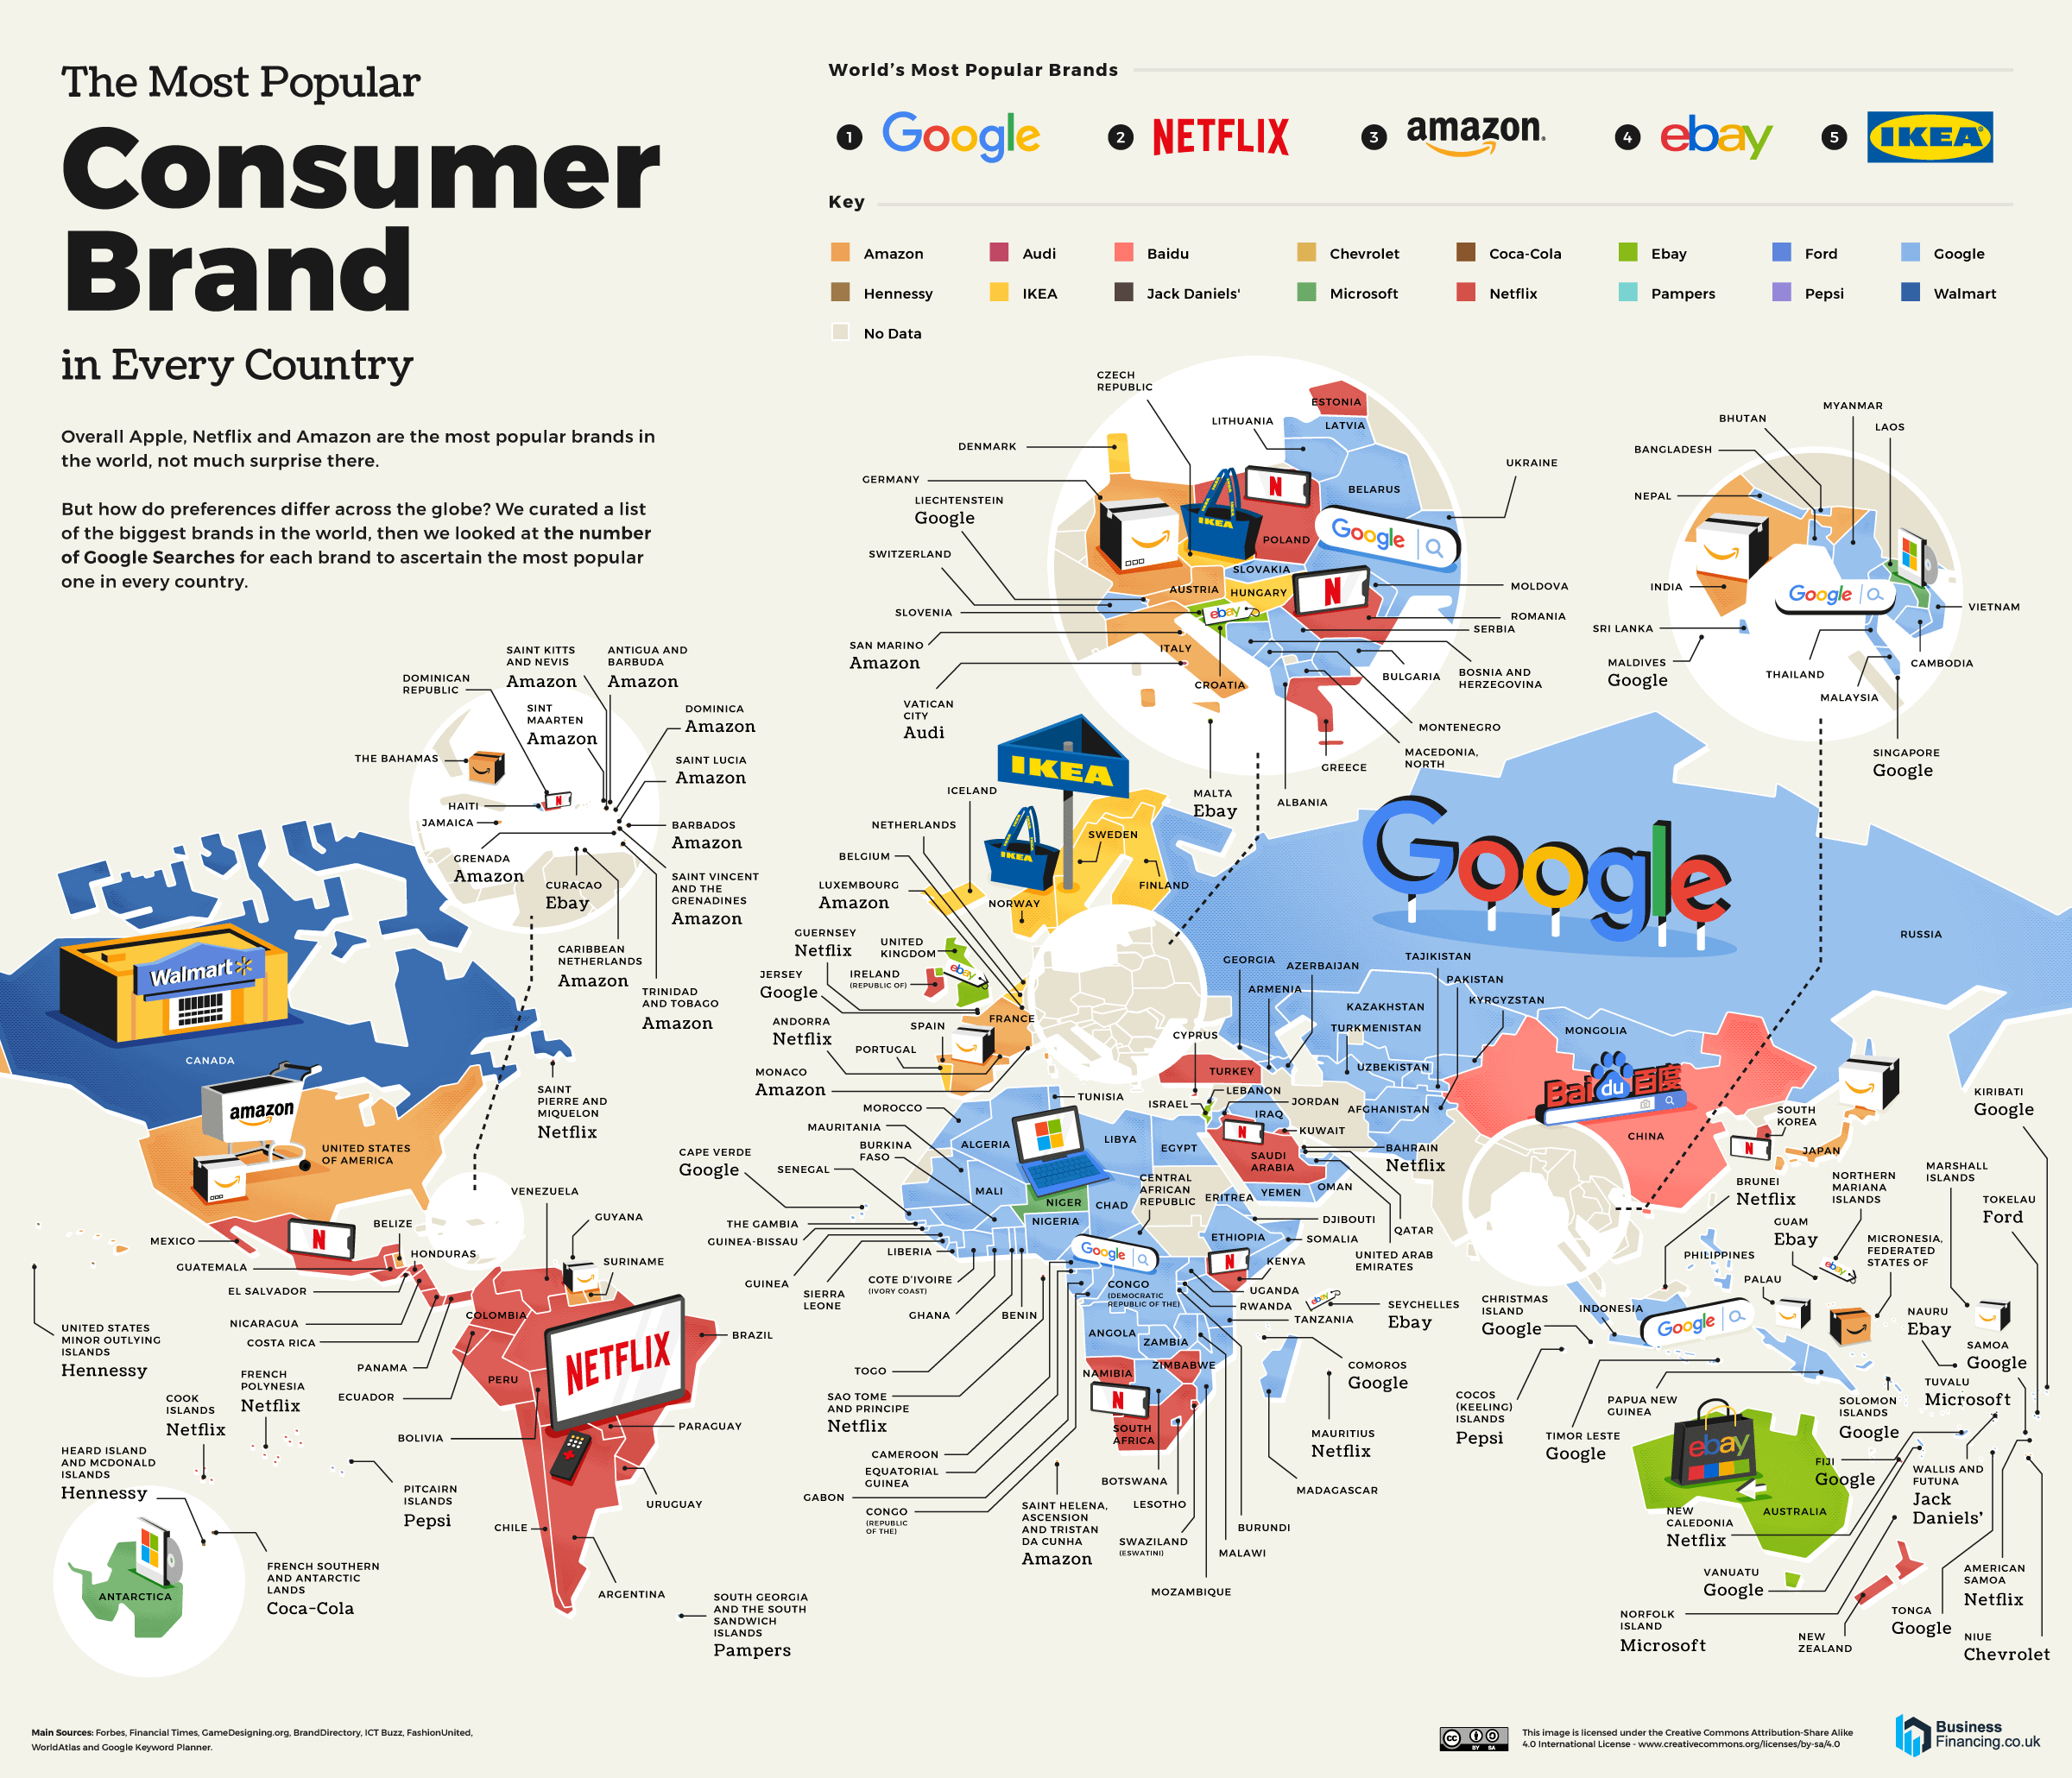 01_Most-Popular-Consumer-Brand-in-Every-Country_World-HD